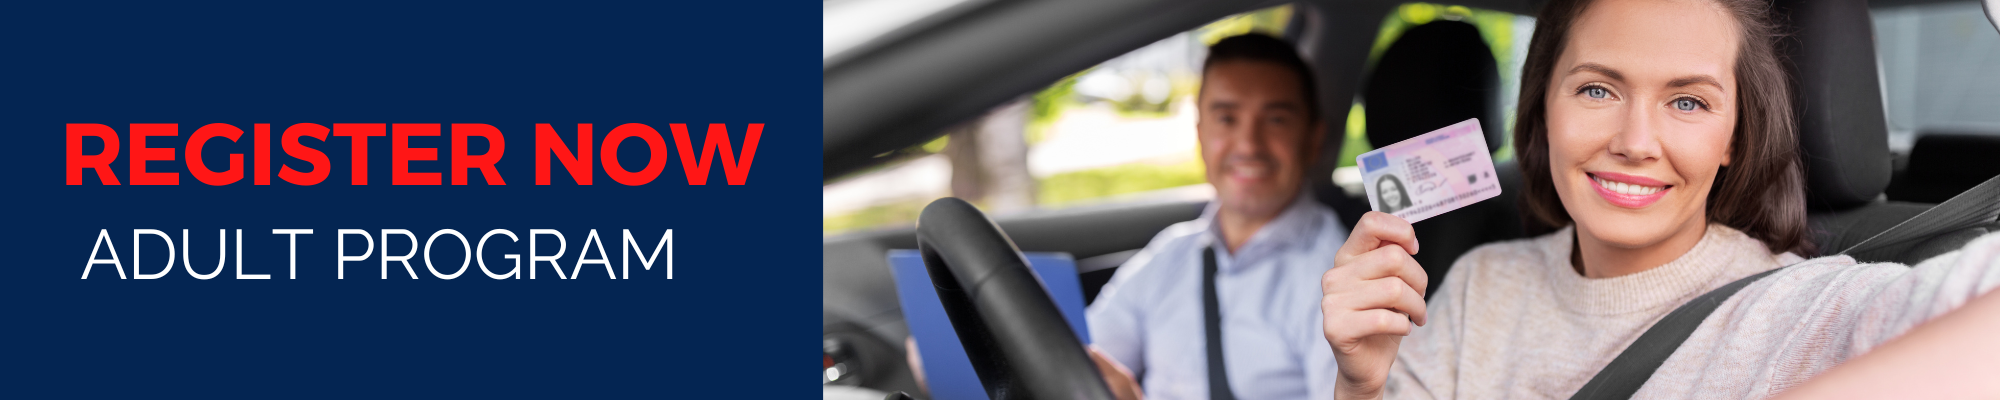 Driving School in Virginia - Driving Instructors - Driving Instructions for New Drivers - Horizon Driving School